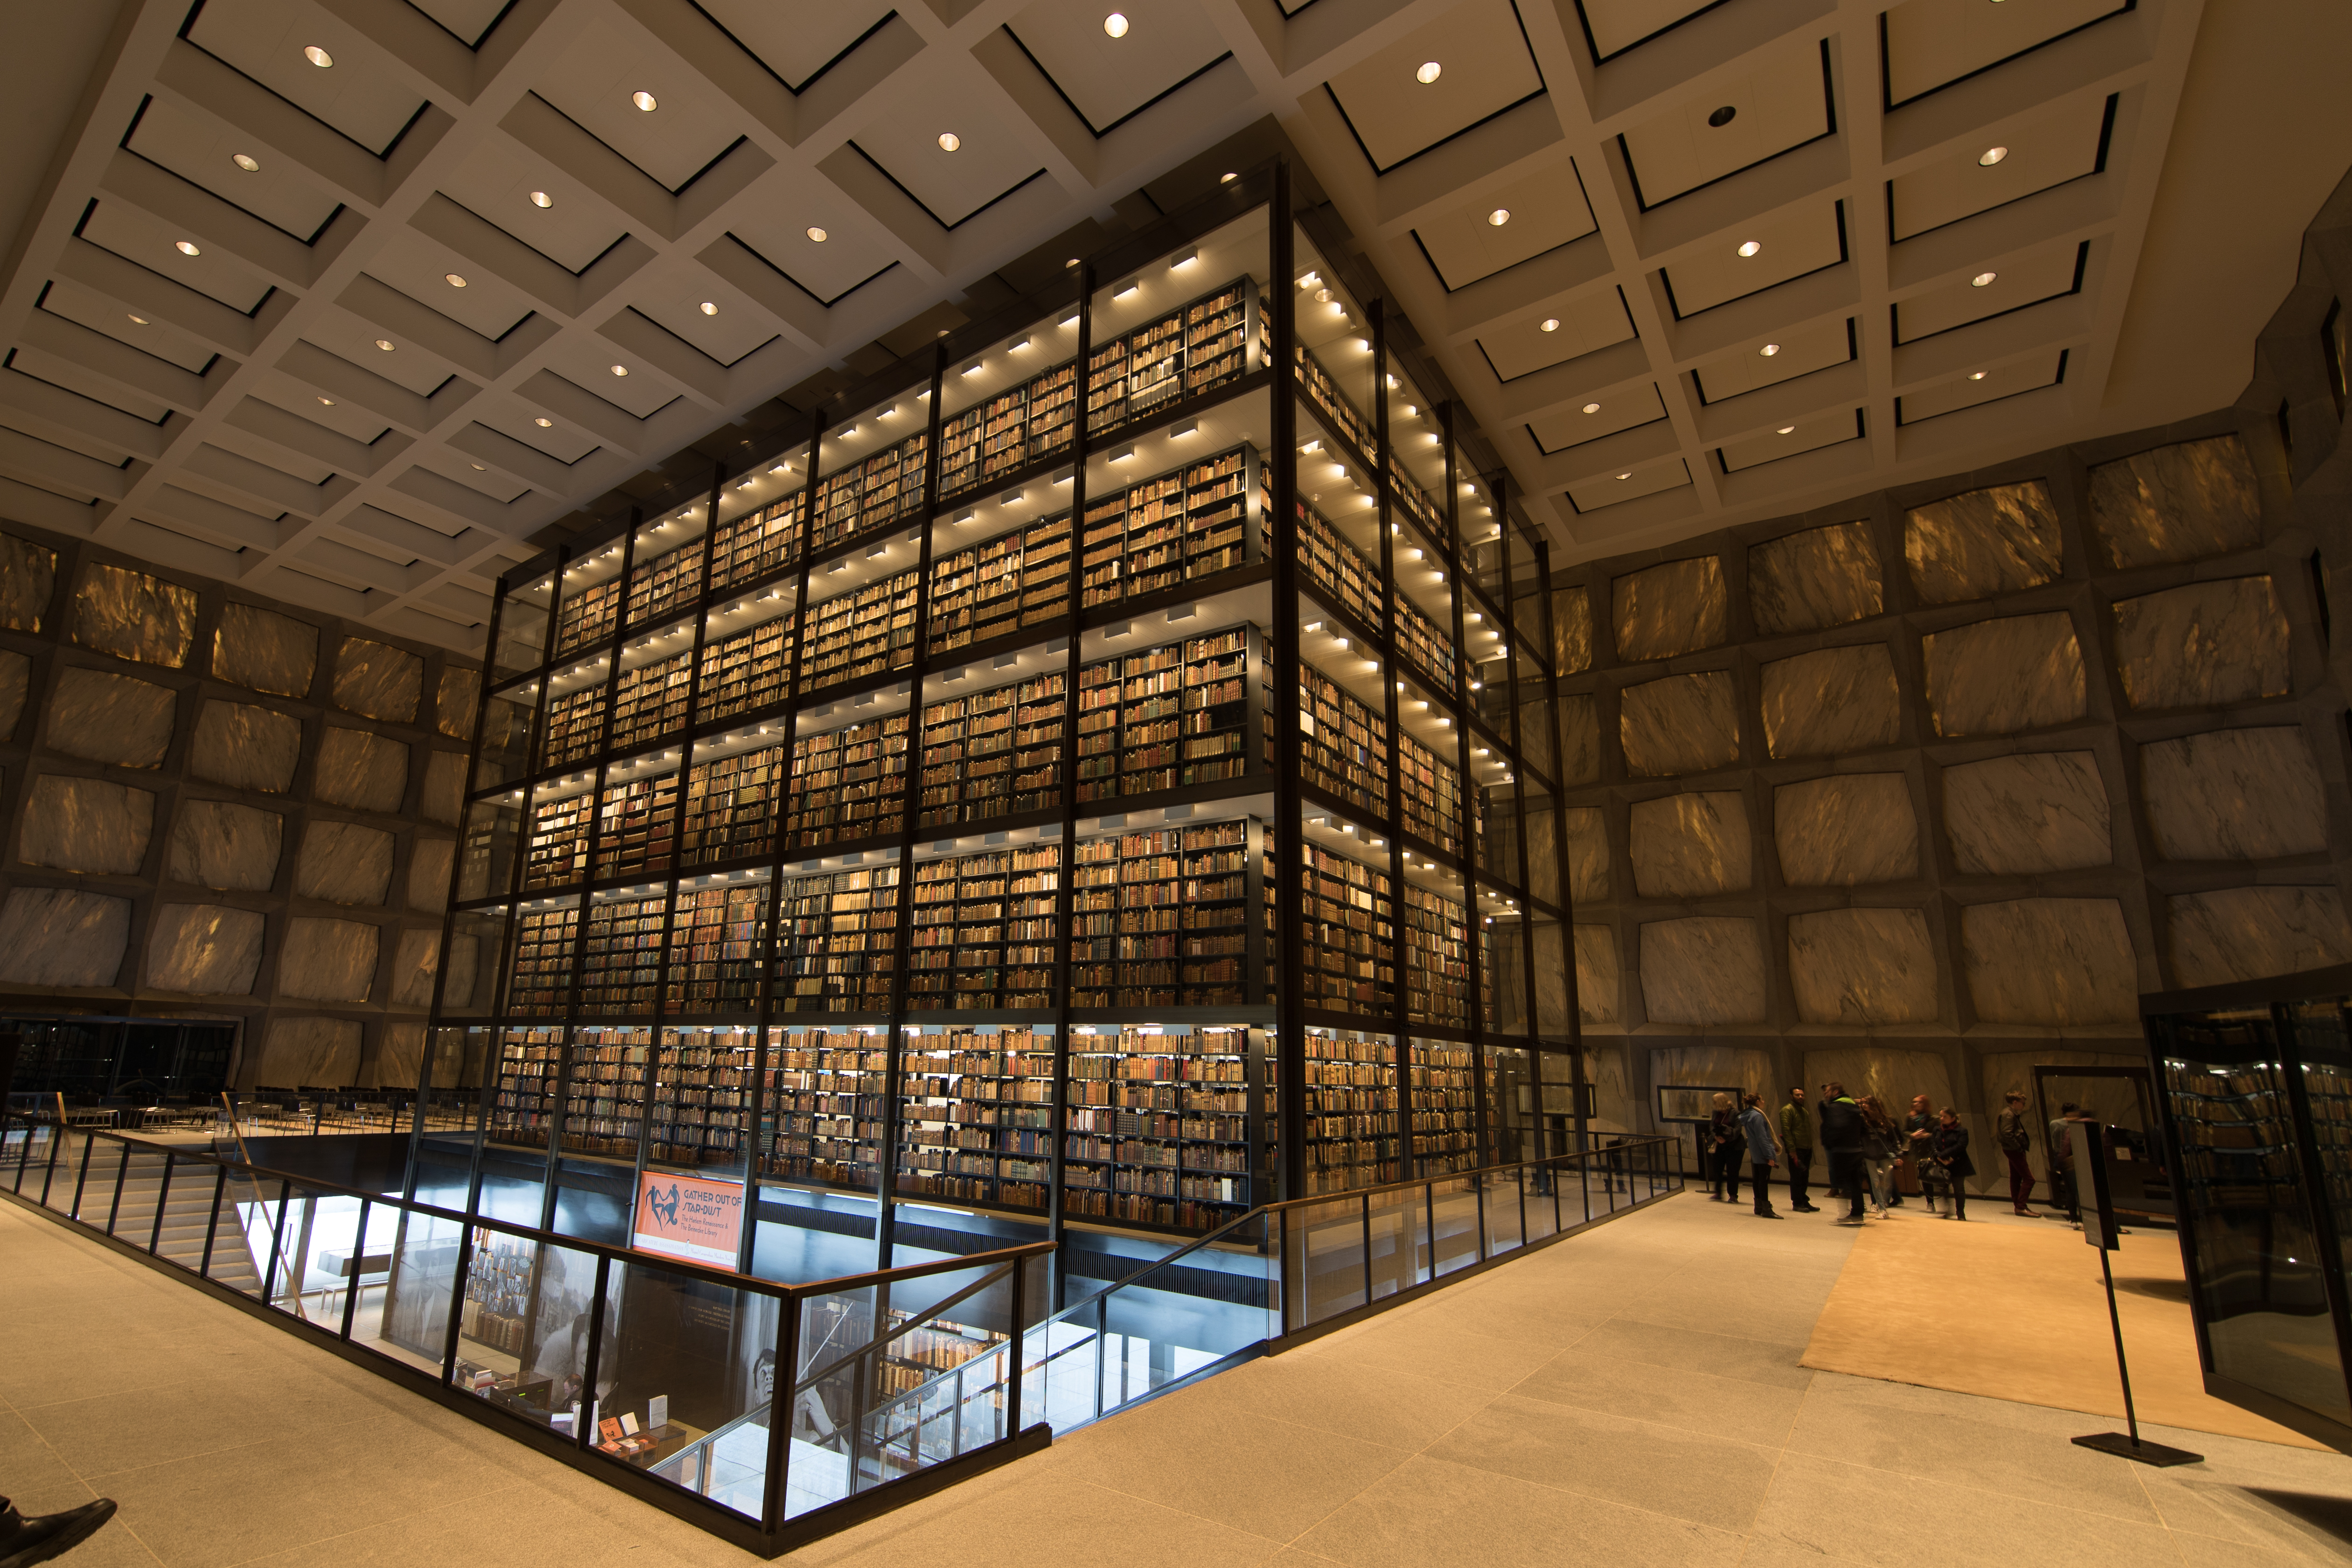 20170420 Beinecke Rare Book Library Interior Yale University New Haven Connecticut